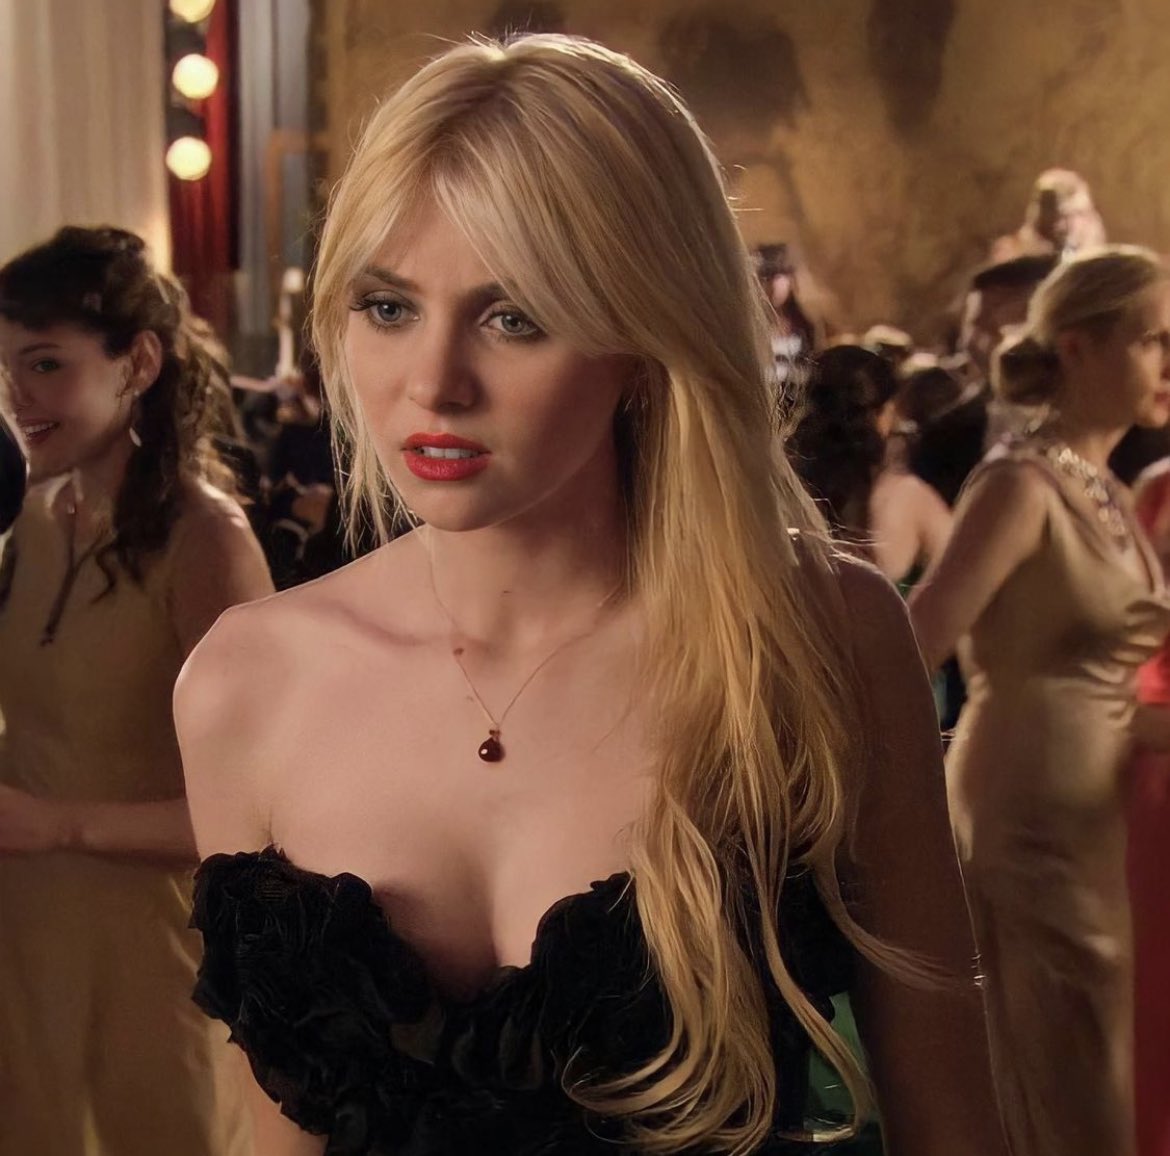 RT @drugproblem: Jenny Humphrey was that girl https://t.co/fzGmE2WhUt